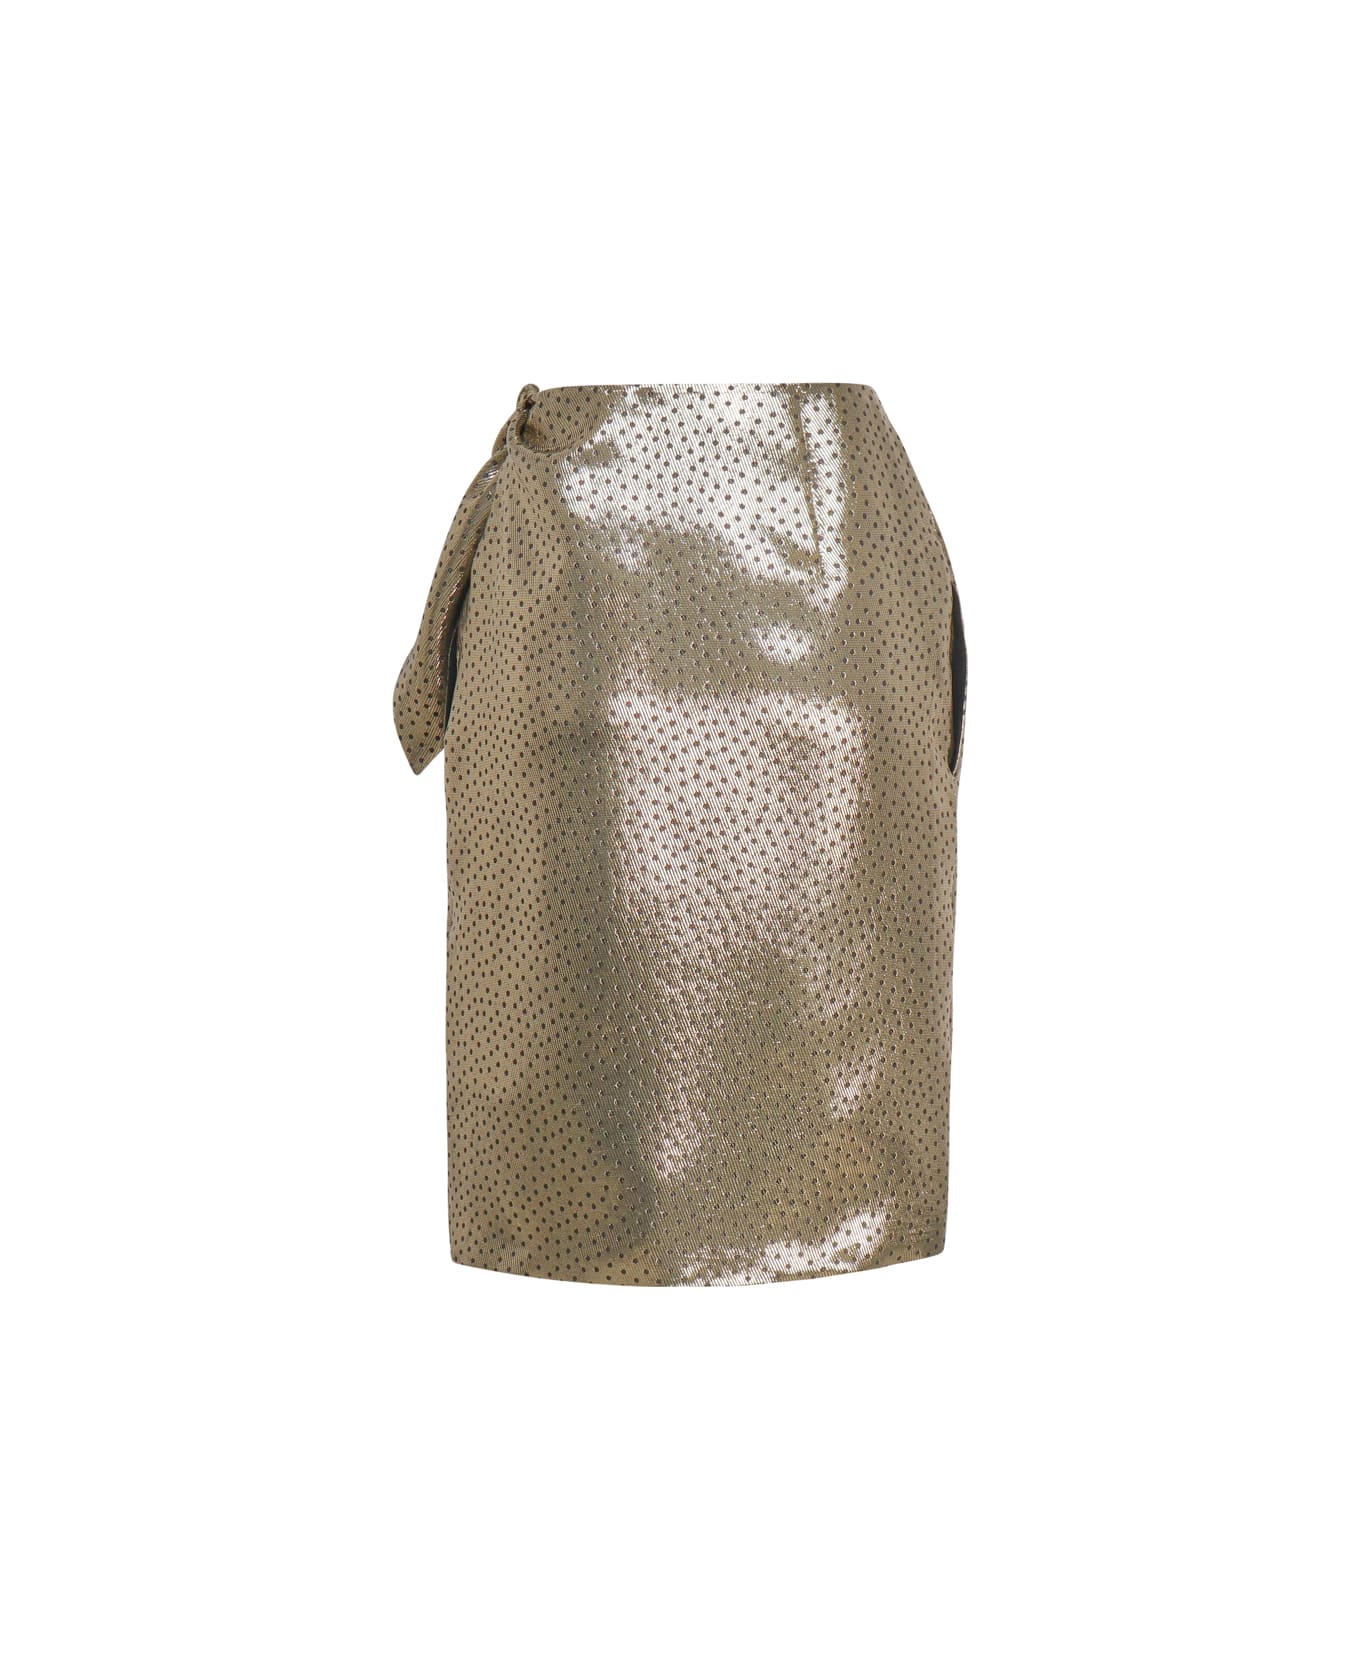 Saint Laurent Knotted Pencil Skirt In Polka Dot Lamé - Gold